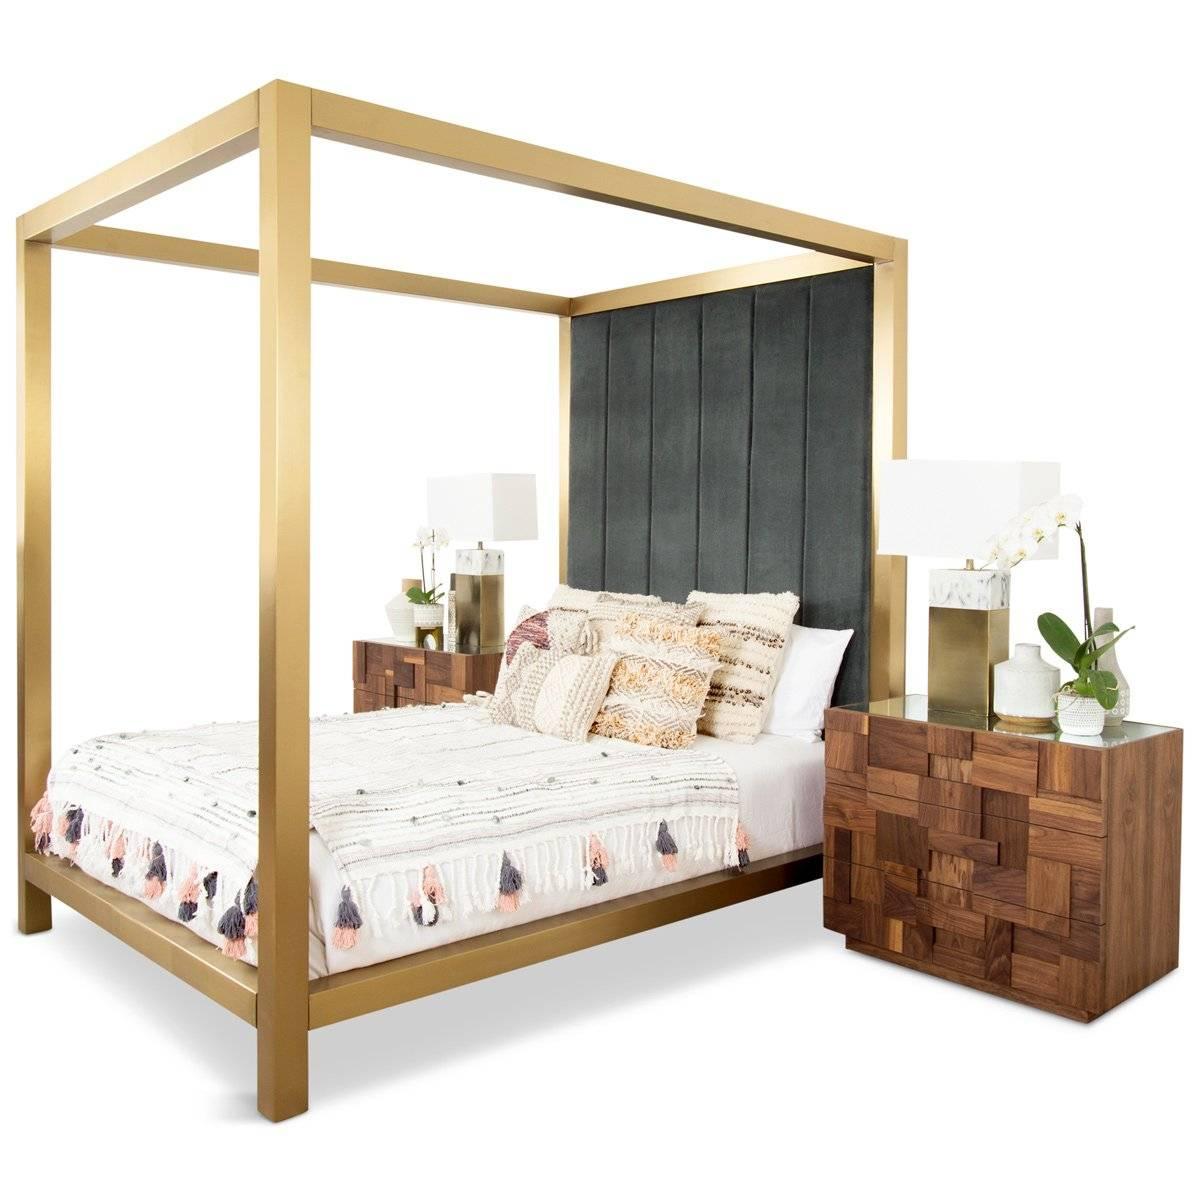 Create a beautiful and serene bedroom with the scotch and soda four-poster bed. A brushed brass frame features strong lines that define the boundaries of your sleep space and provides subtle cues to leave your worries and busy day on the outside. A